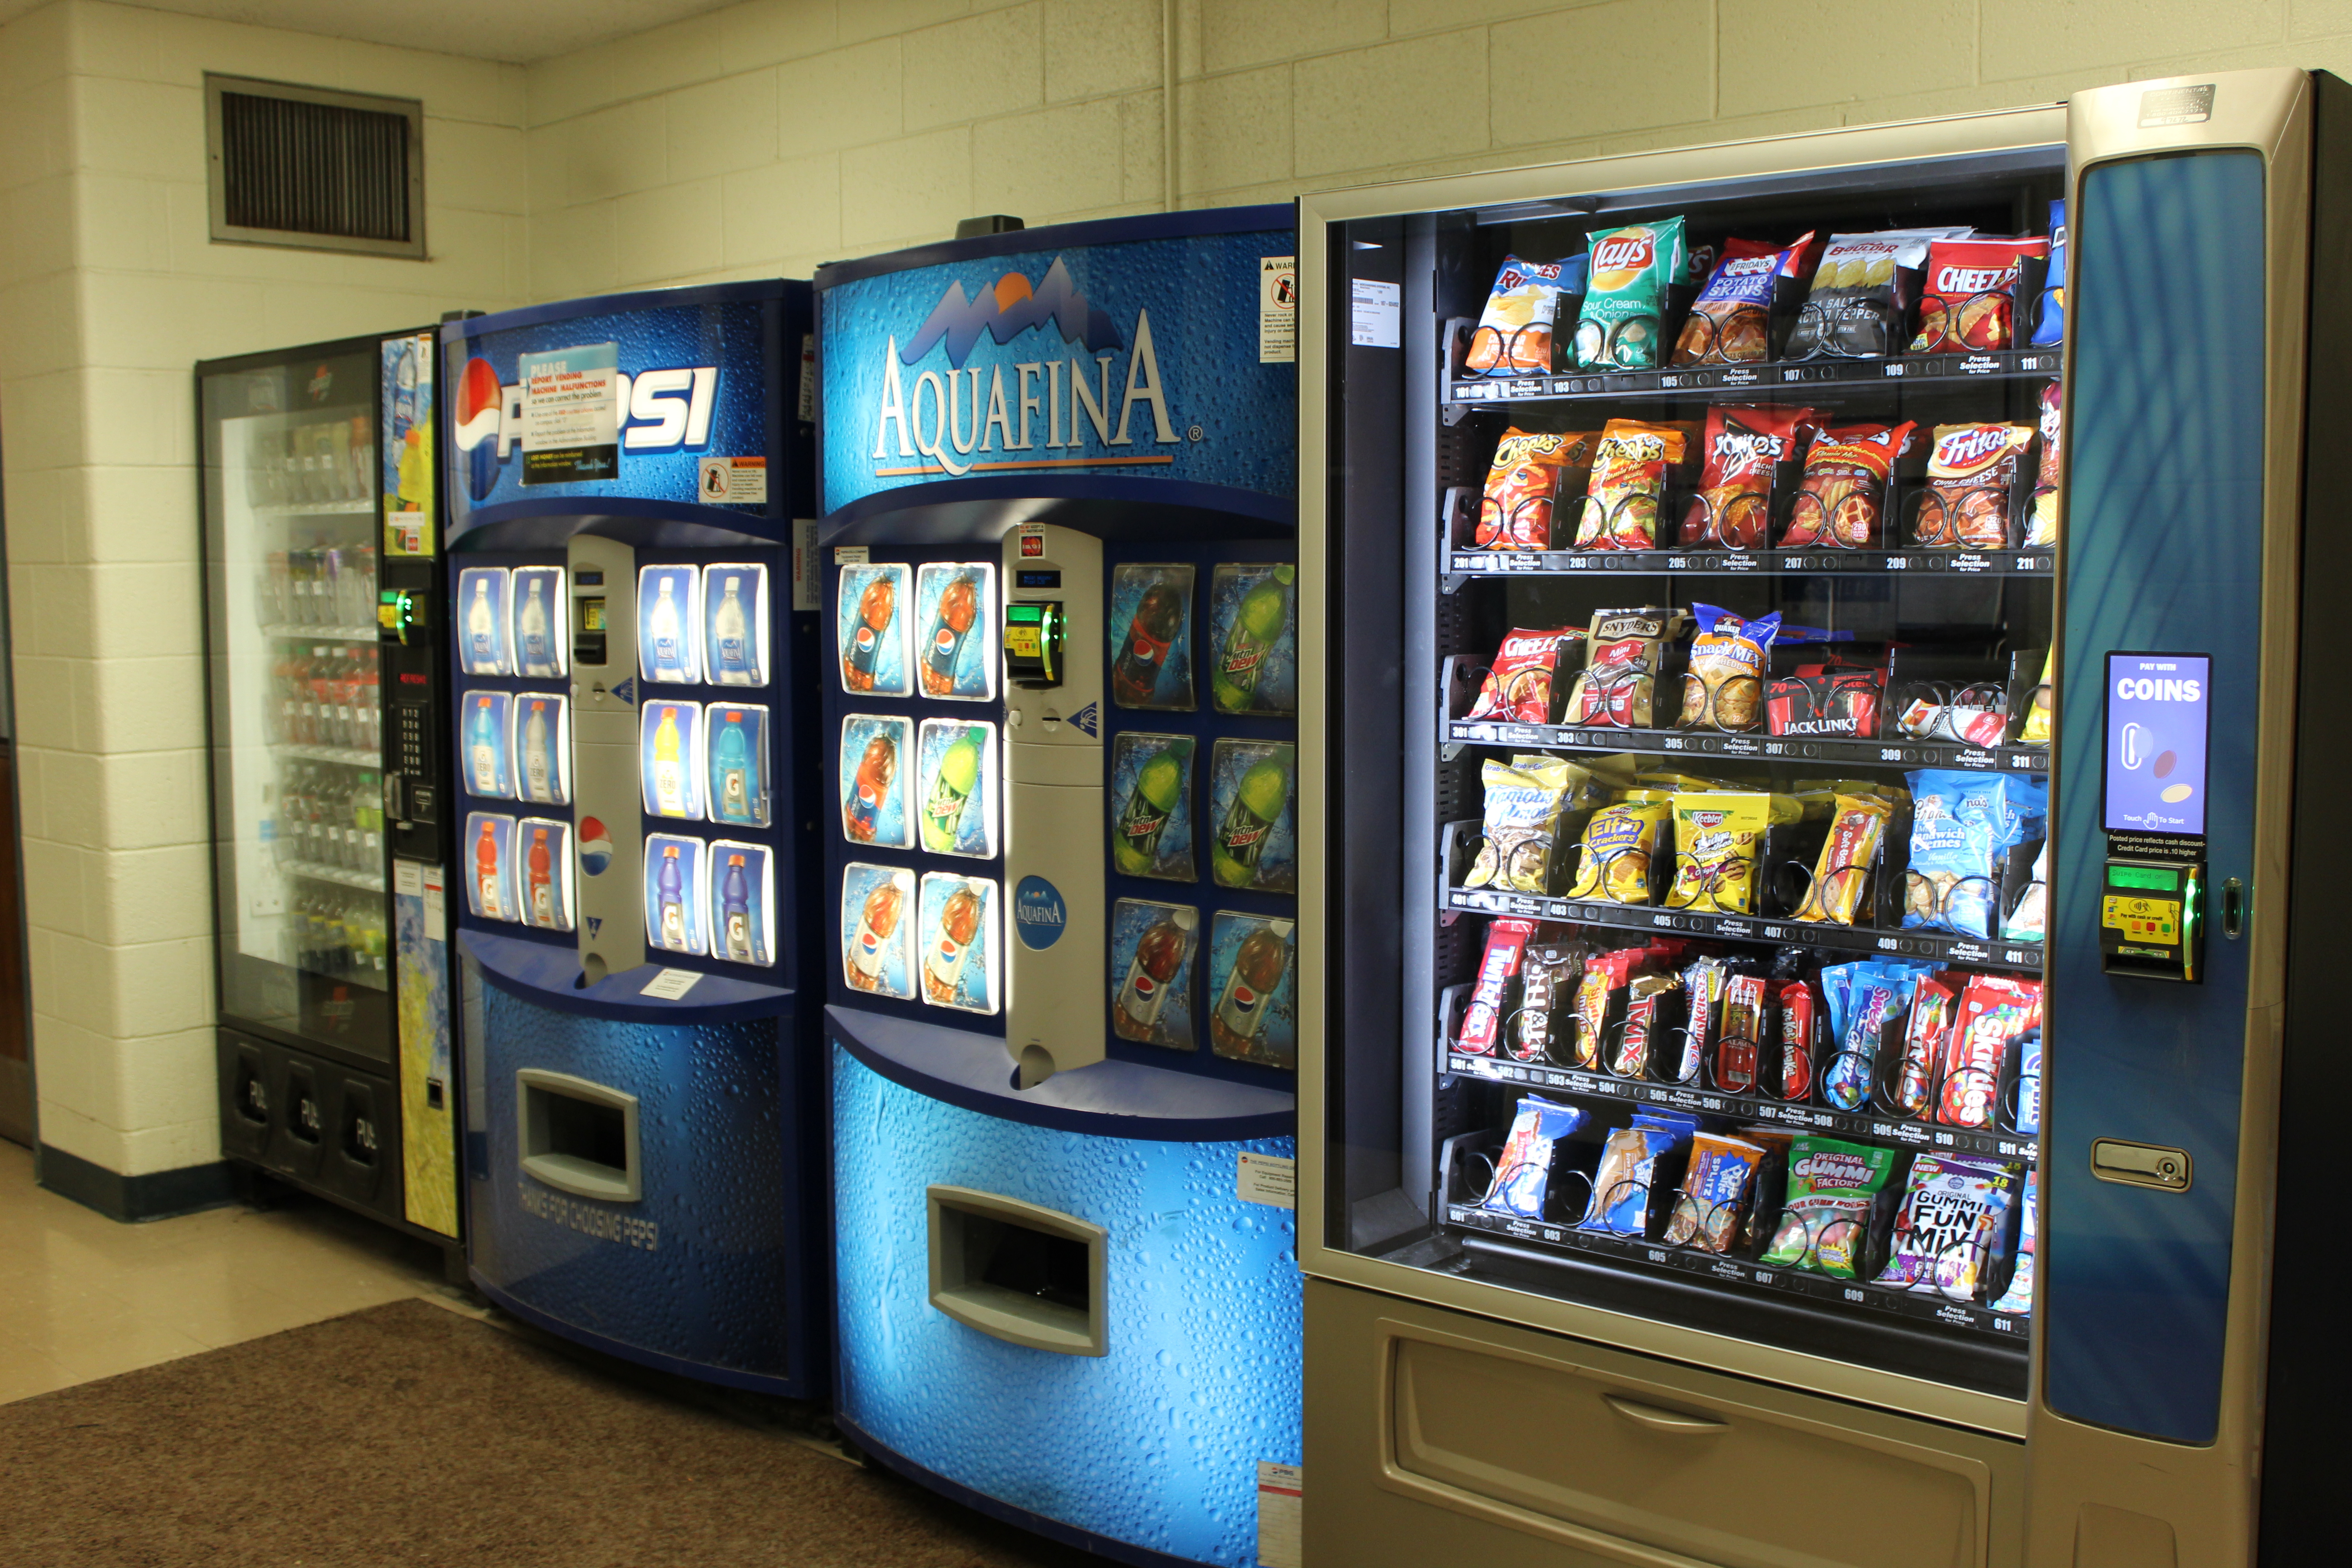 New university contract brings updated vending machines to campus buildings